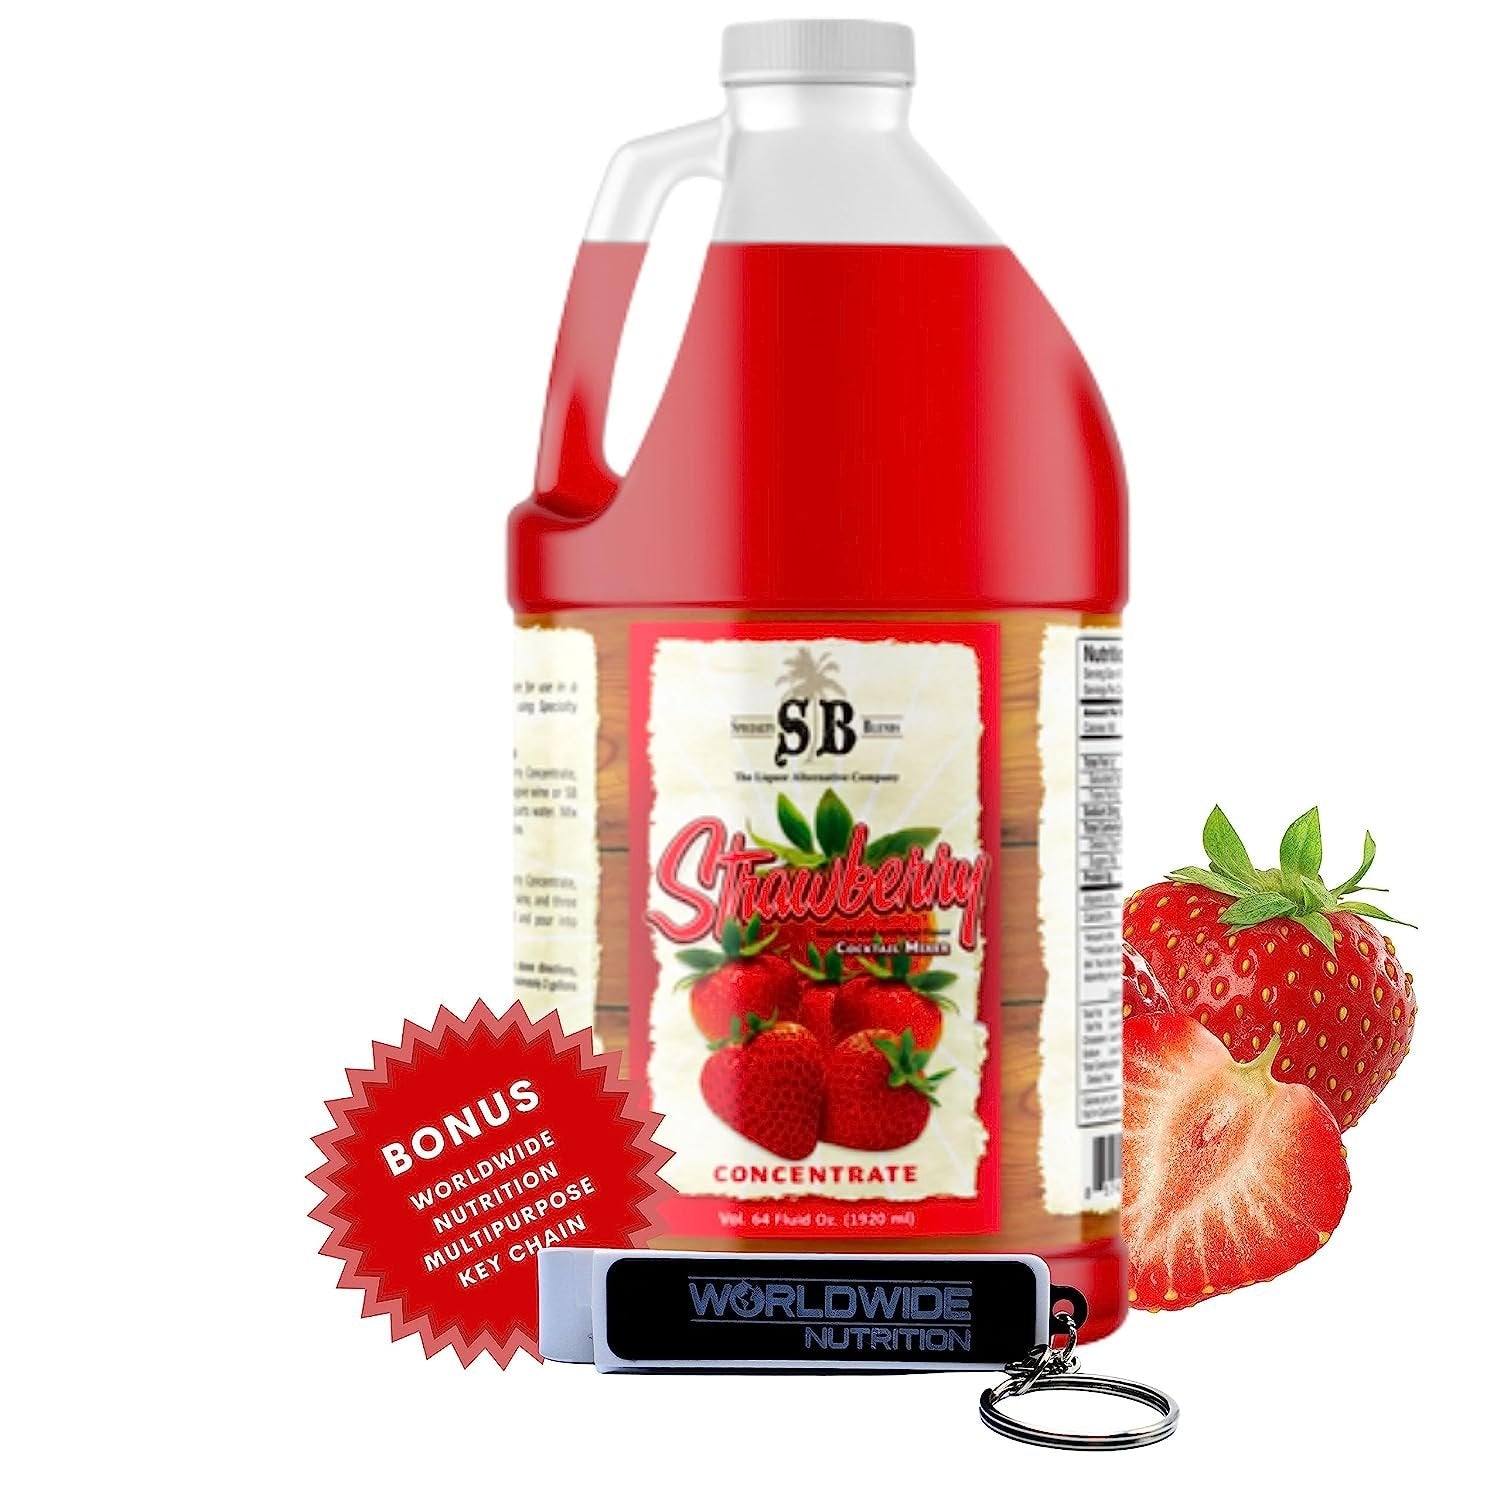 Specialty Blends Strawberry Syrup Margarita Mix Concentrate, Made with Organic Strawberries 1/2 Gallon Drink Mix (Pack of 1) - with Bonus Worldwide Nutrition Multi Purpose Key Chain